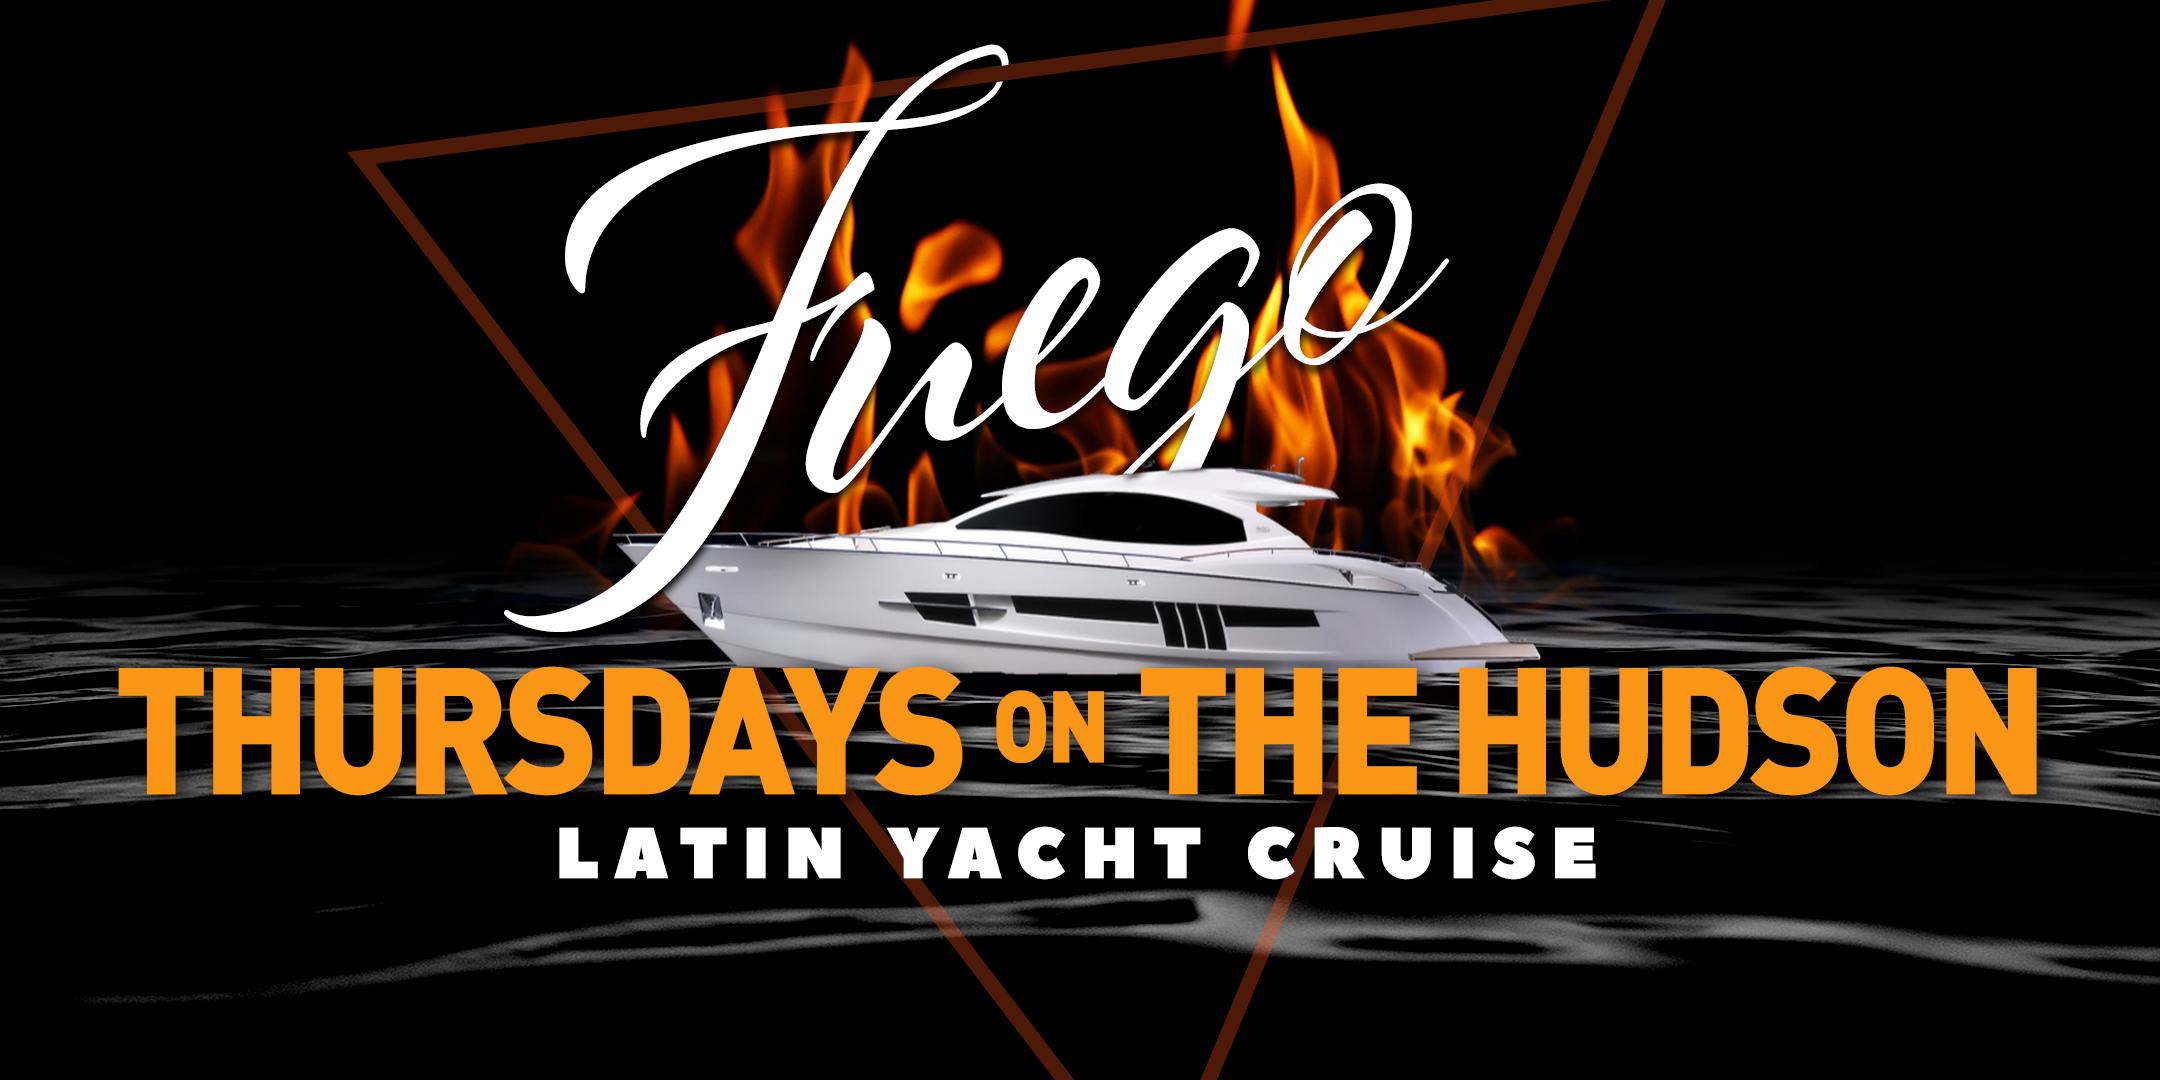 Fuego on the Hudson - Latin Happy Hour Thursday SUNSET Afterwork Yacht Cruise in Manhattan